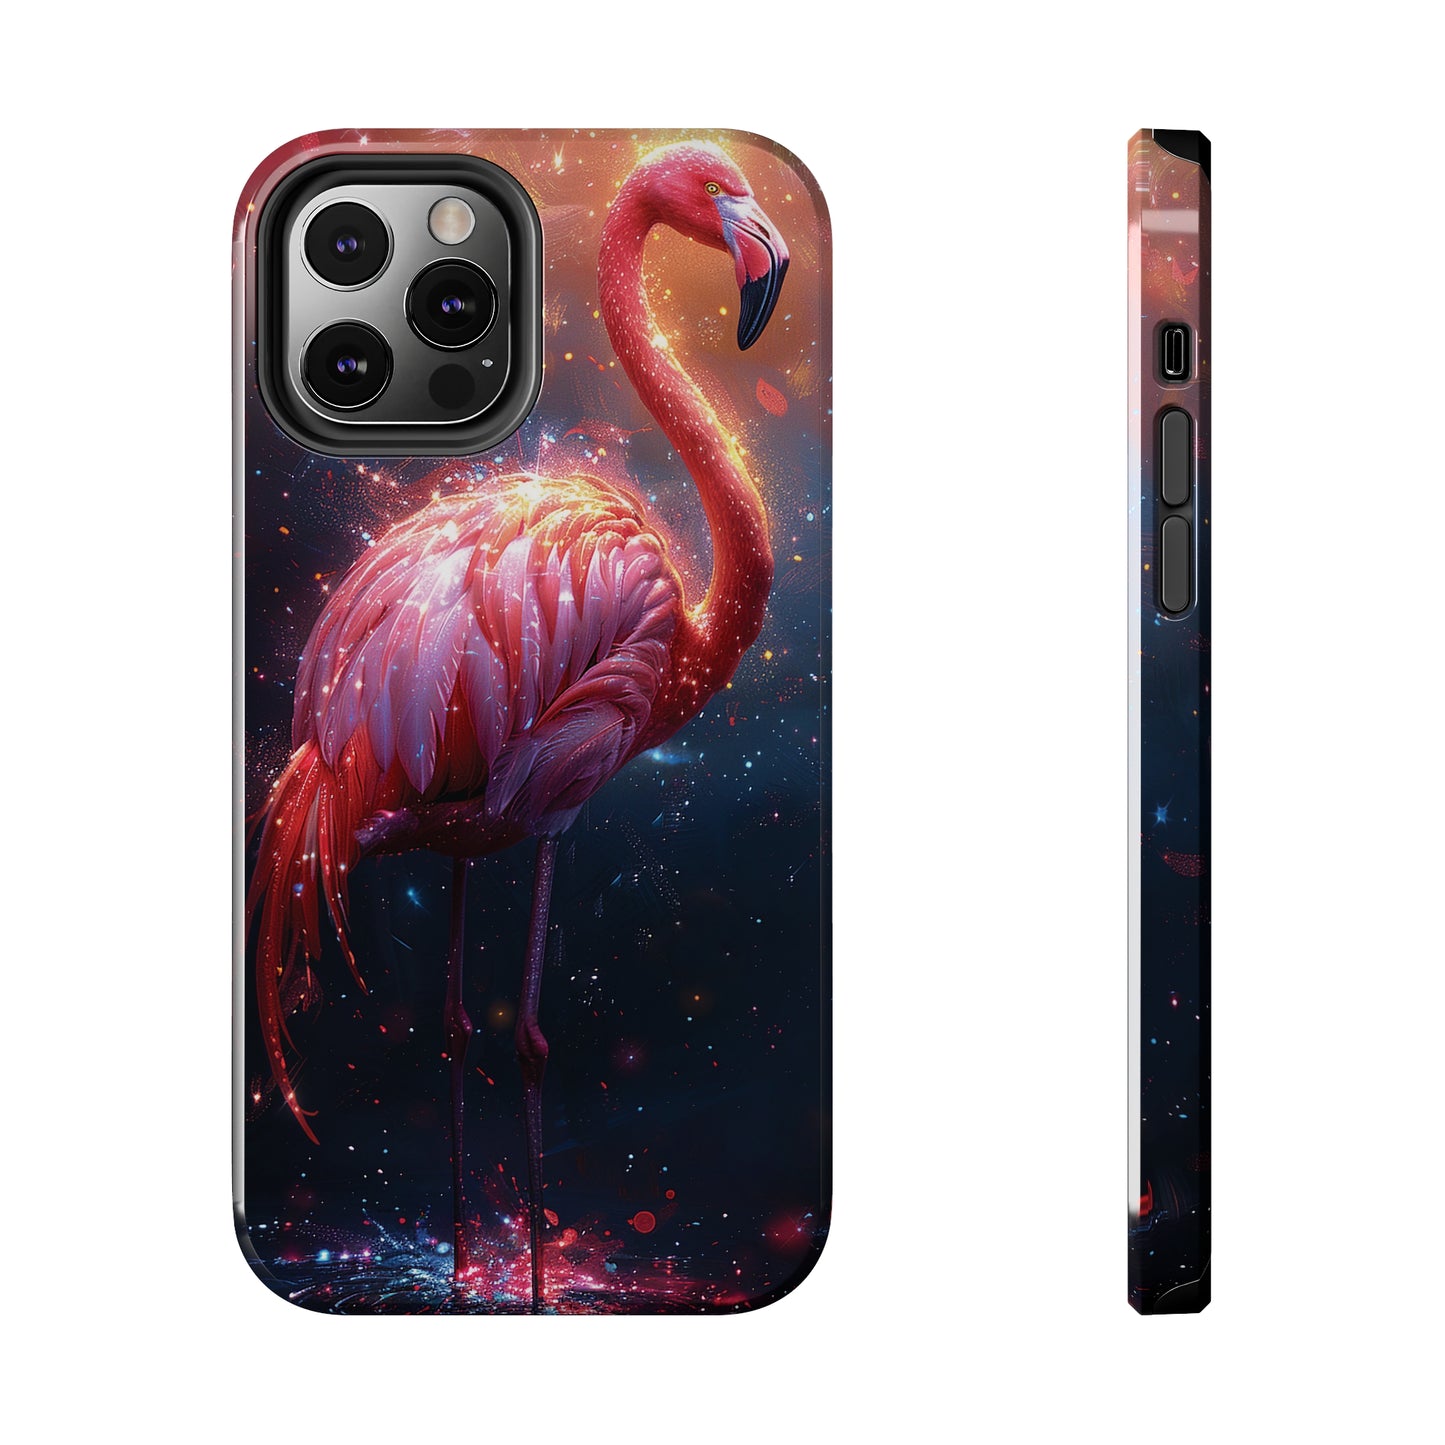 Fantasy Flamingo iPhone Case, Colorful Bird Art Protective Phone Cover, Unique Animal Design, Durable Phone Accessory Gift, Chic Artsy Protective Cover, Protective Case for iPhone Models, Tough iPhone Case